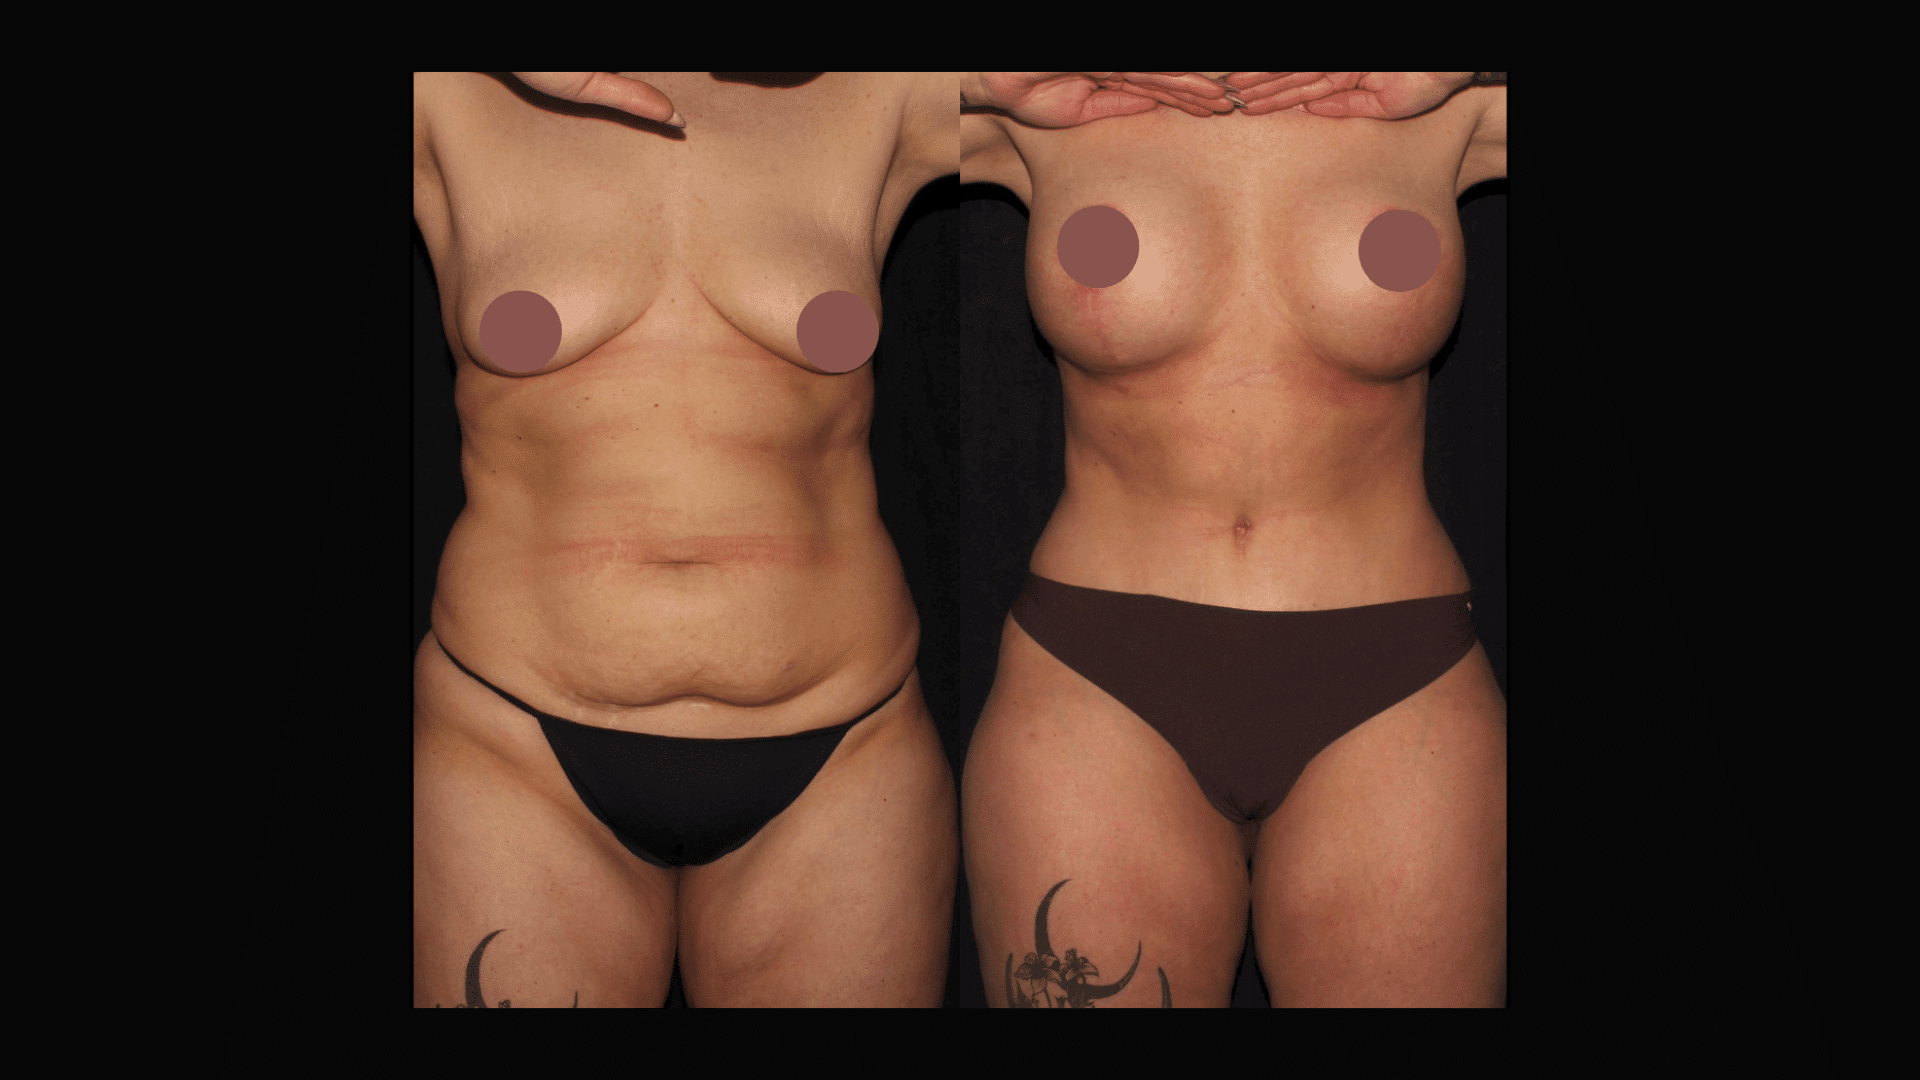 Mommy Makeover: Breast Augmentation + Tummy Tuck at Silk Touch Cosmetic Surgery & Medspa